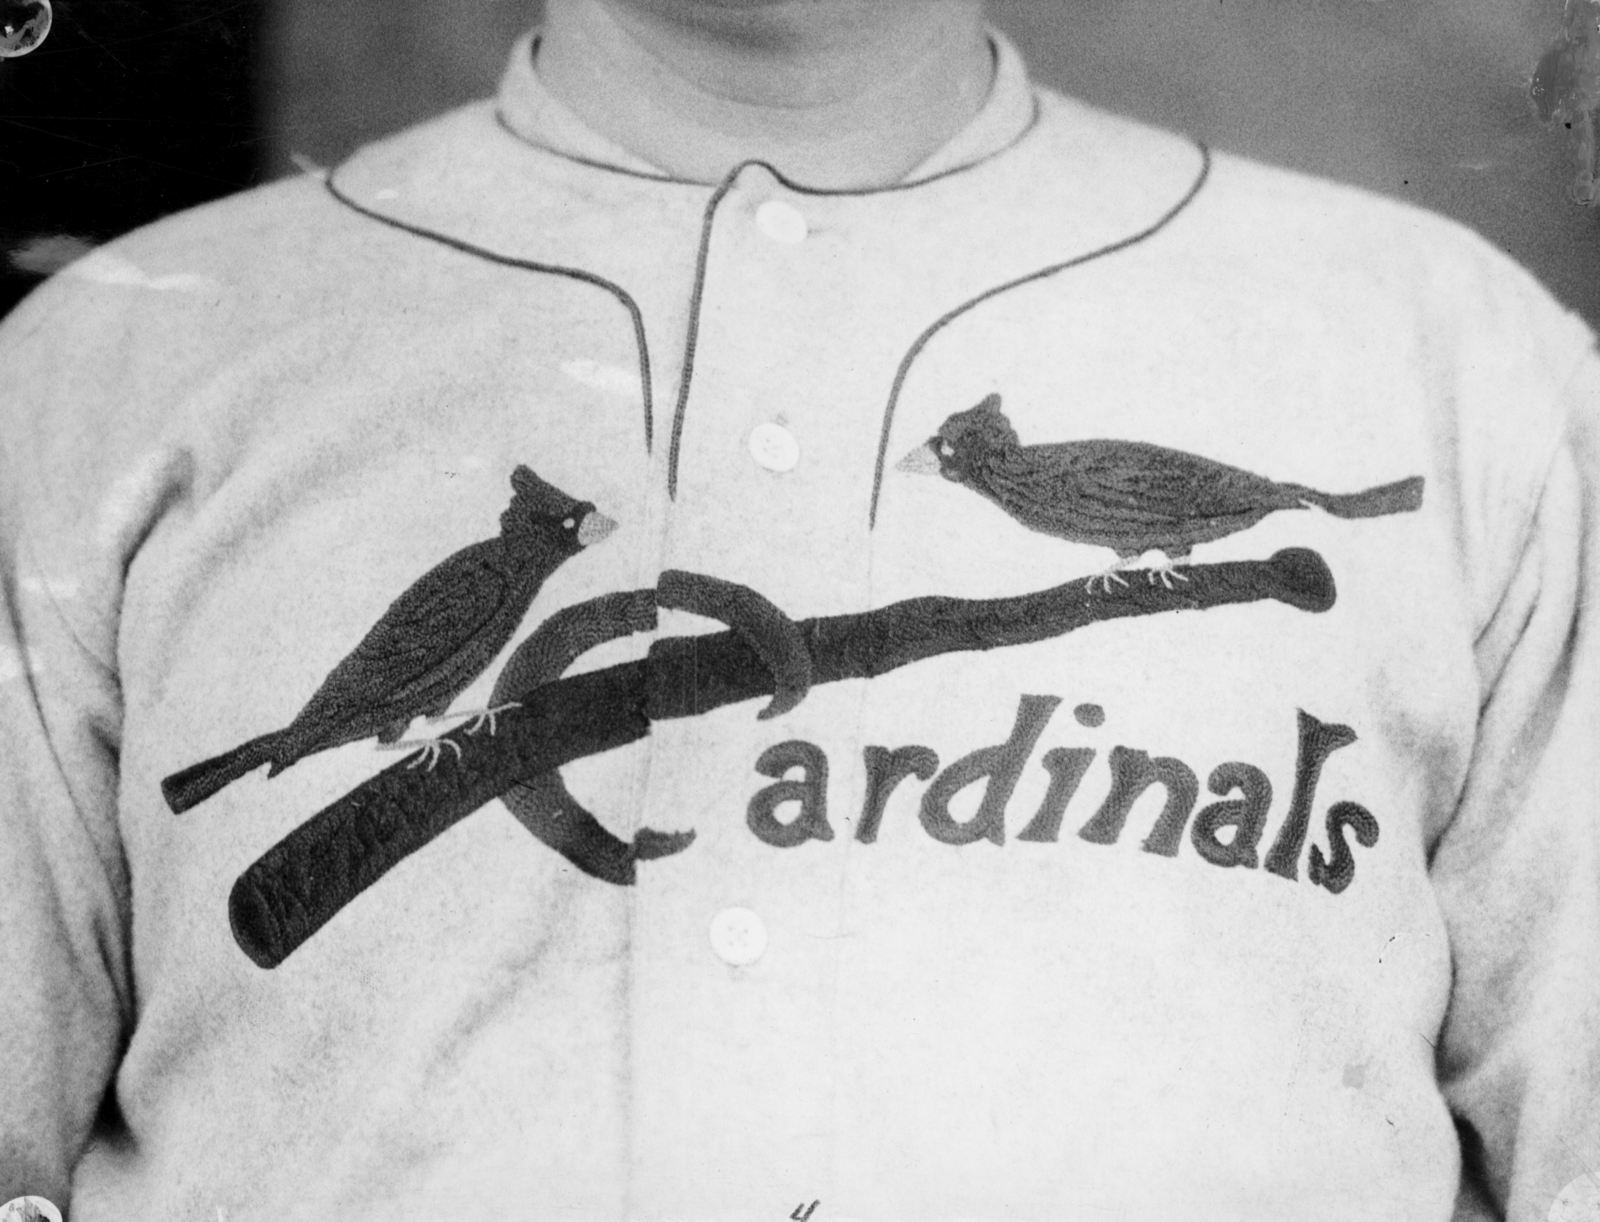 The Birds On Bat Cardinals Logo - How the 'Birds on the Bat' logo came to be